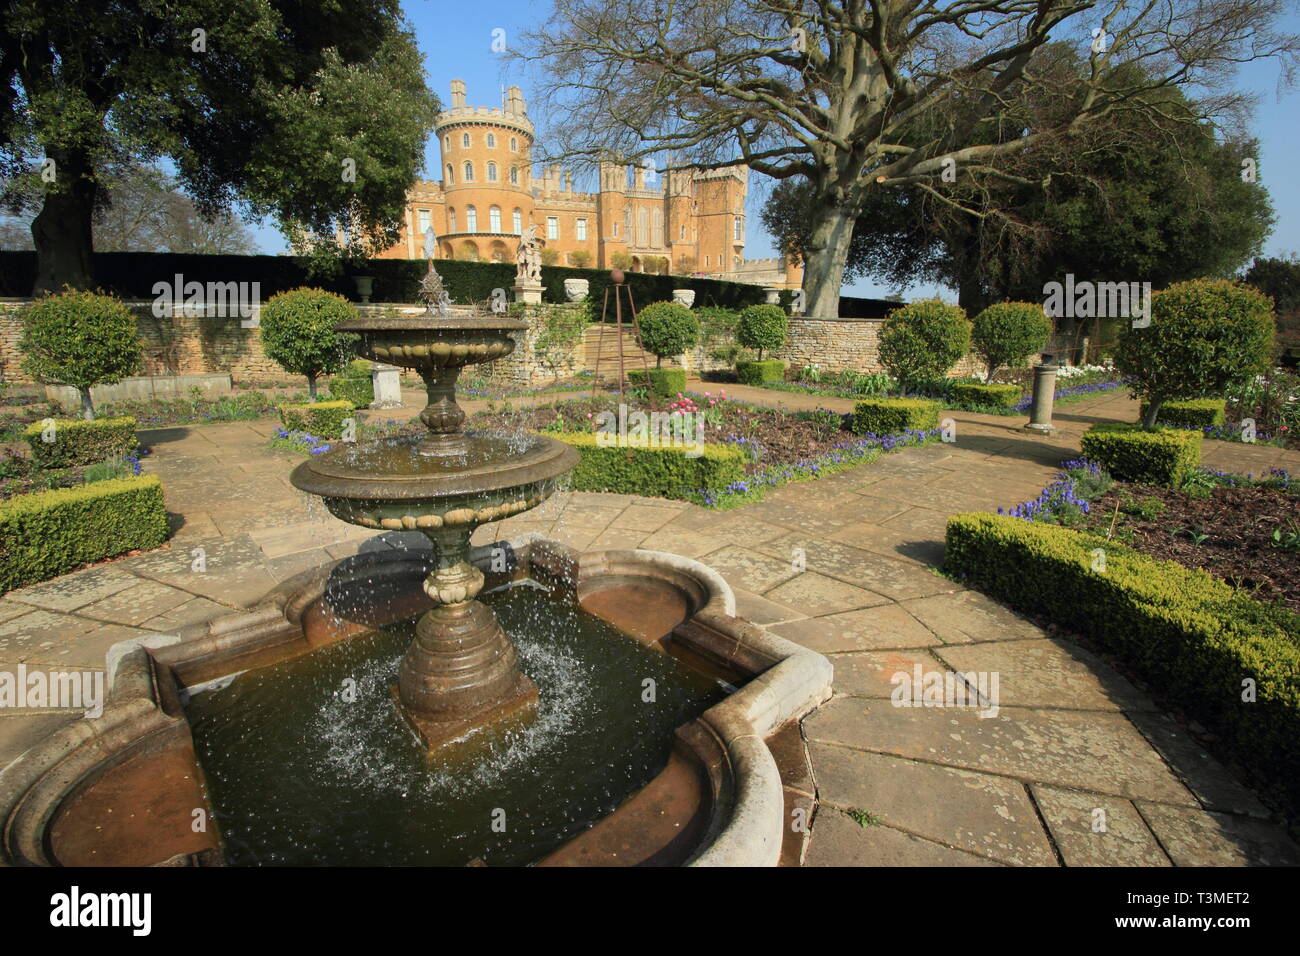 Belvoir Castle, Leicestershire. Belvoir Castle, seat of the Dukes of Rutland, seen from this stately home's Rose Garden in spring, England, UK Stock Photo